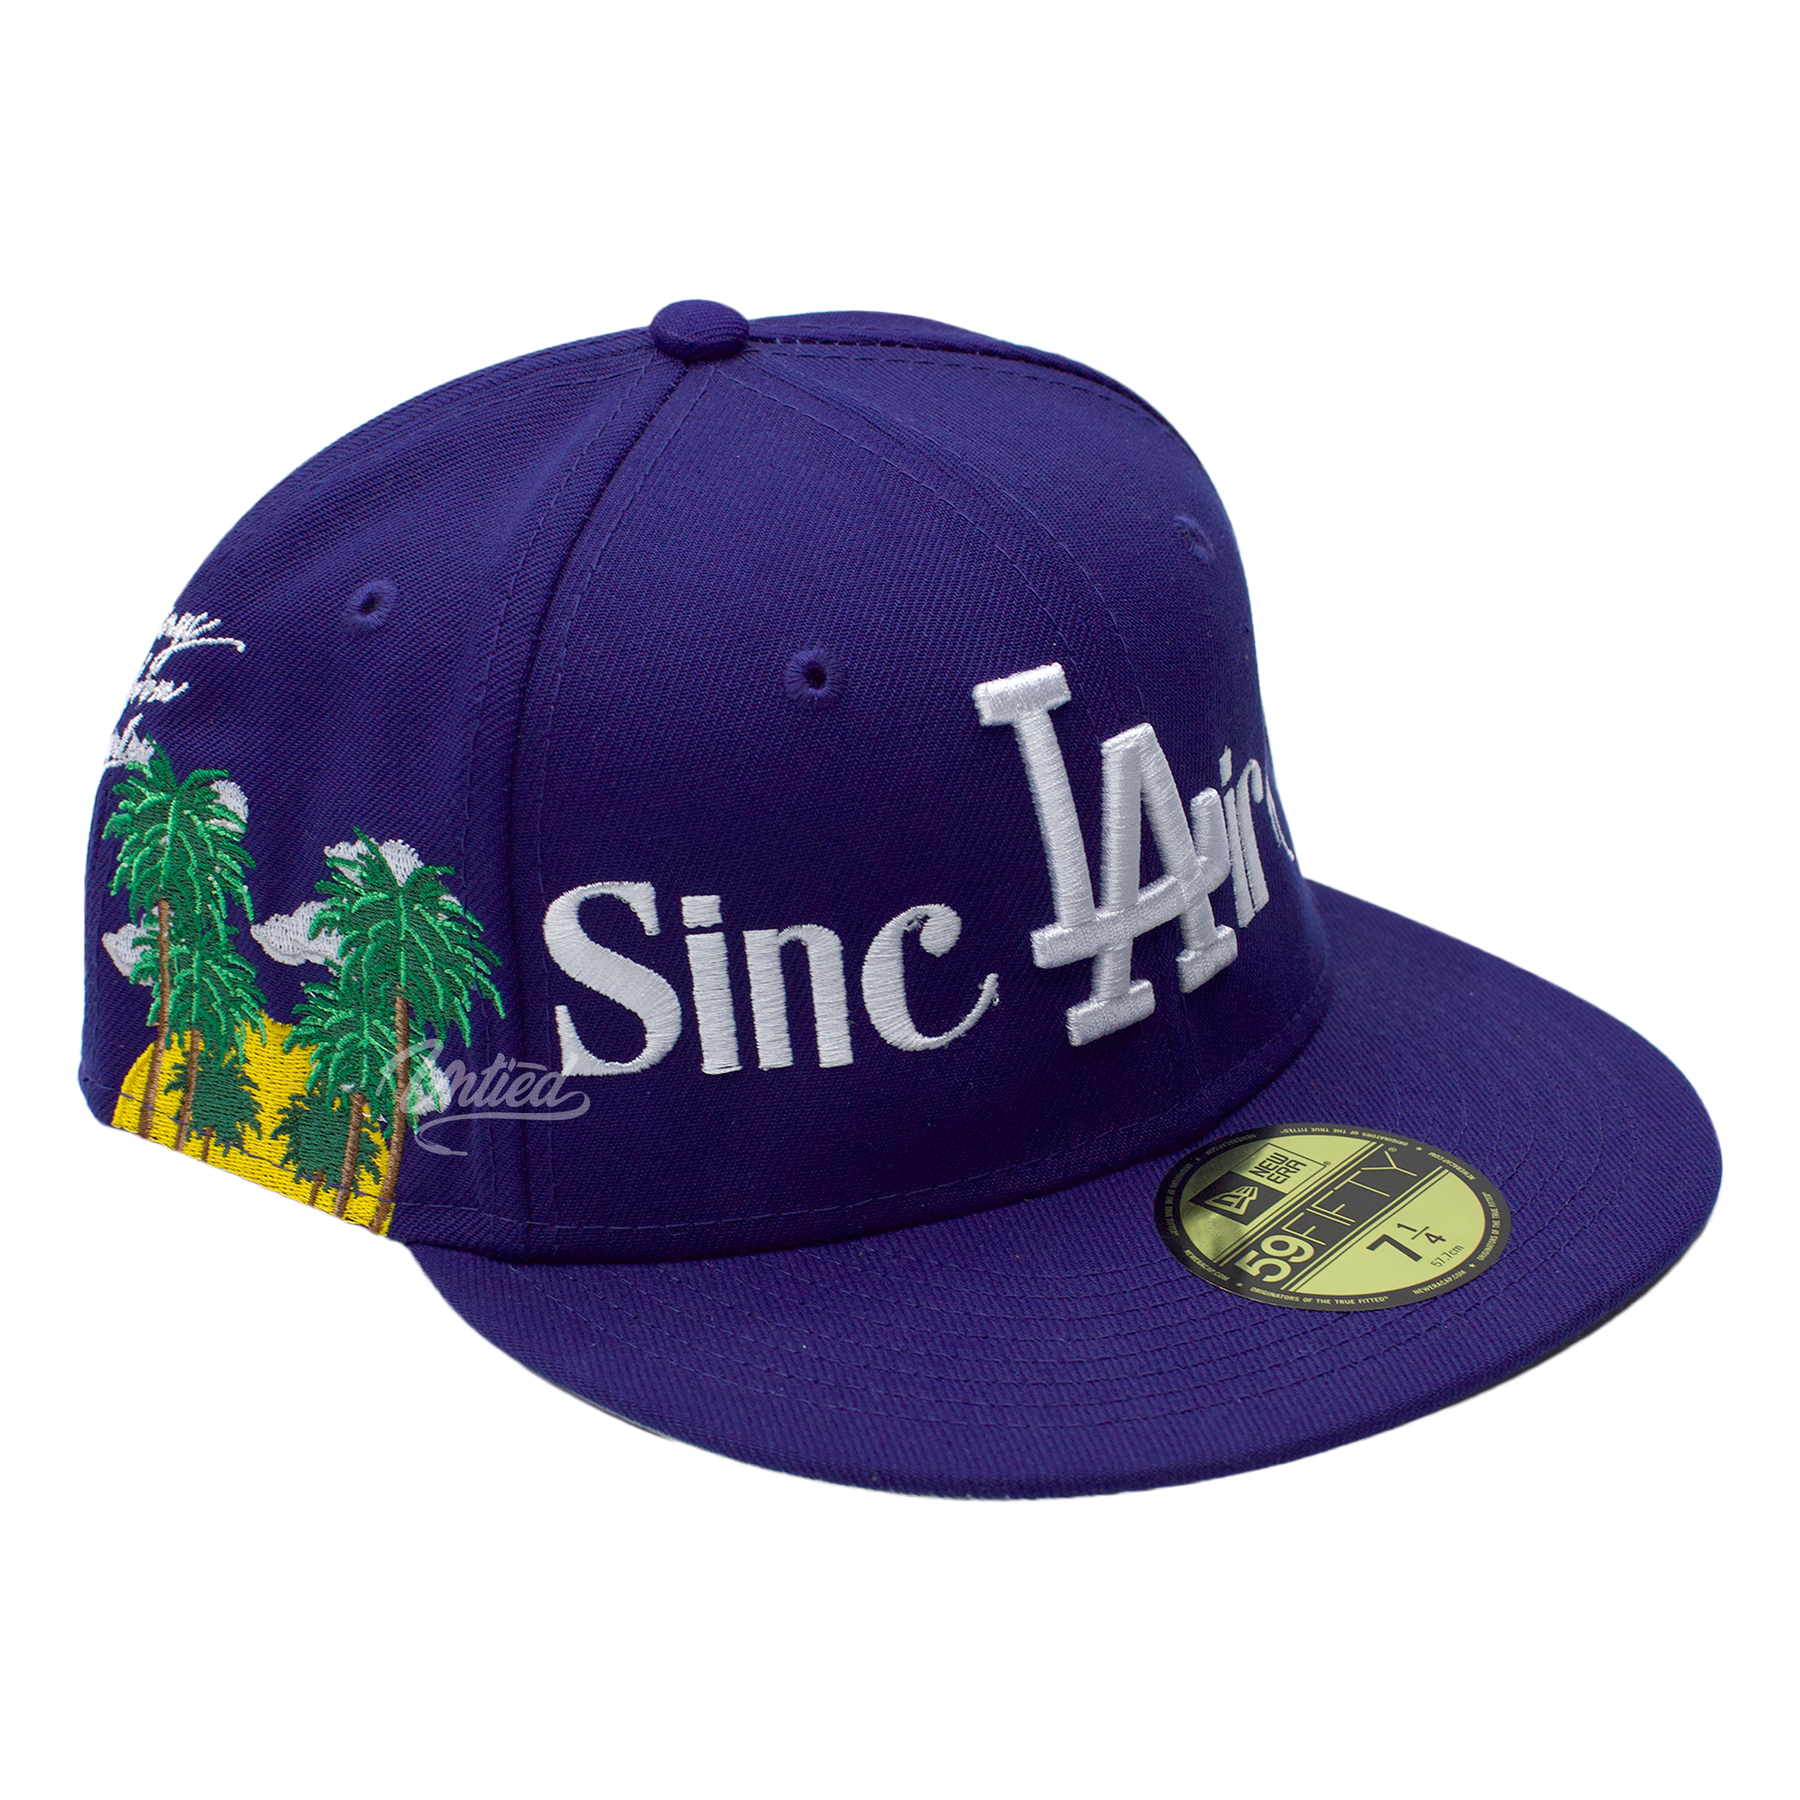 Sinclair New Era Baseball Fitted Cap "LA Blue/White (Embroidered Panel)"